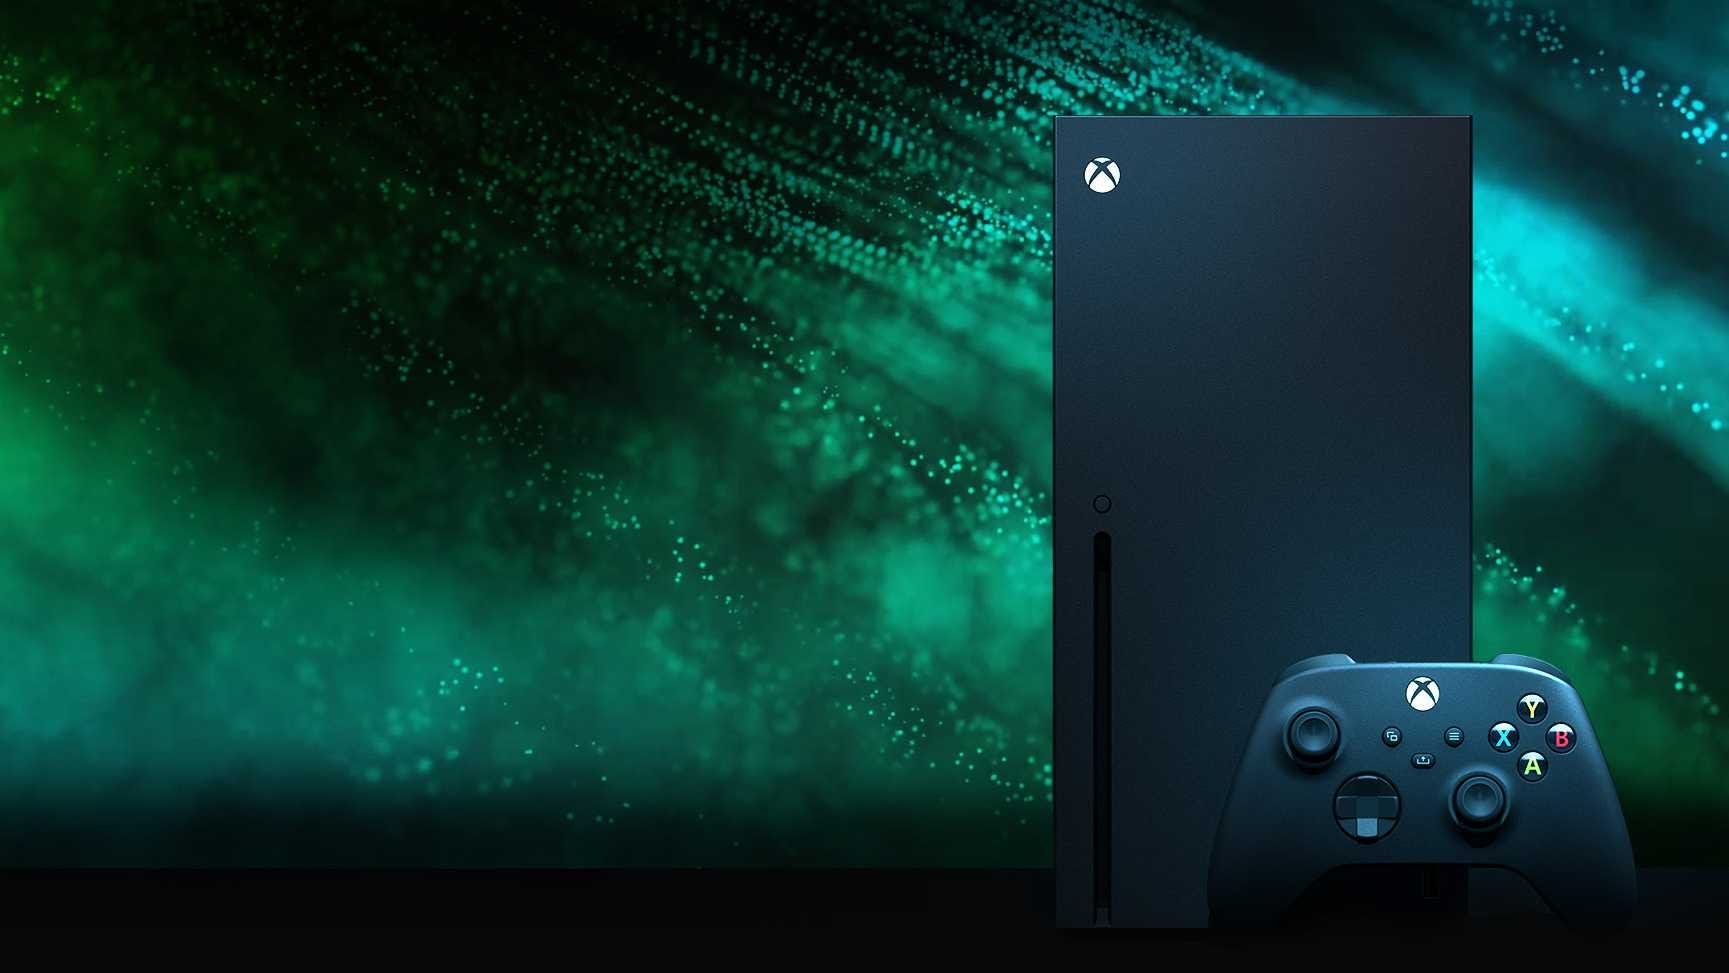 Xbox's Phil Spencer considers PS5 and Nintendo Switch players part